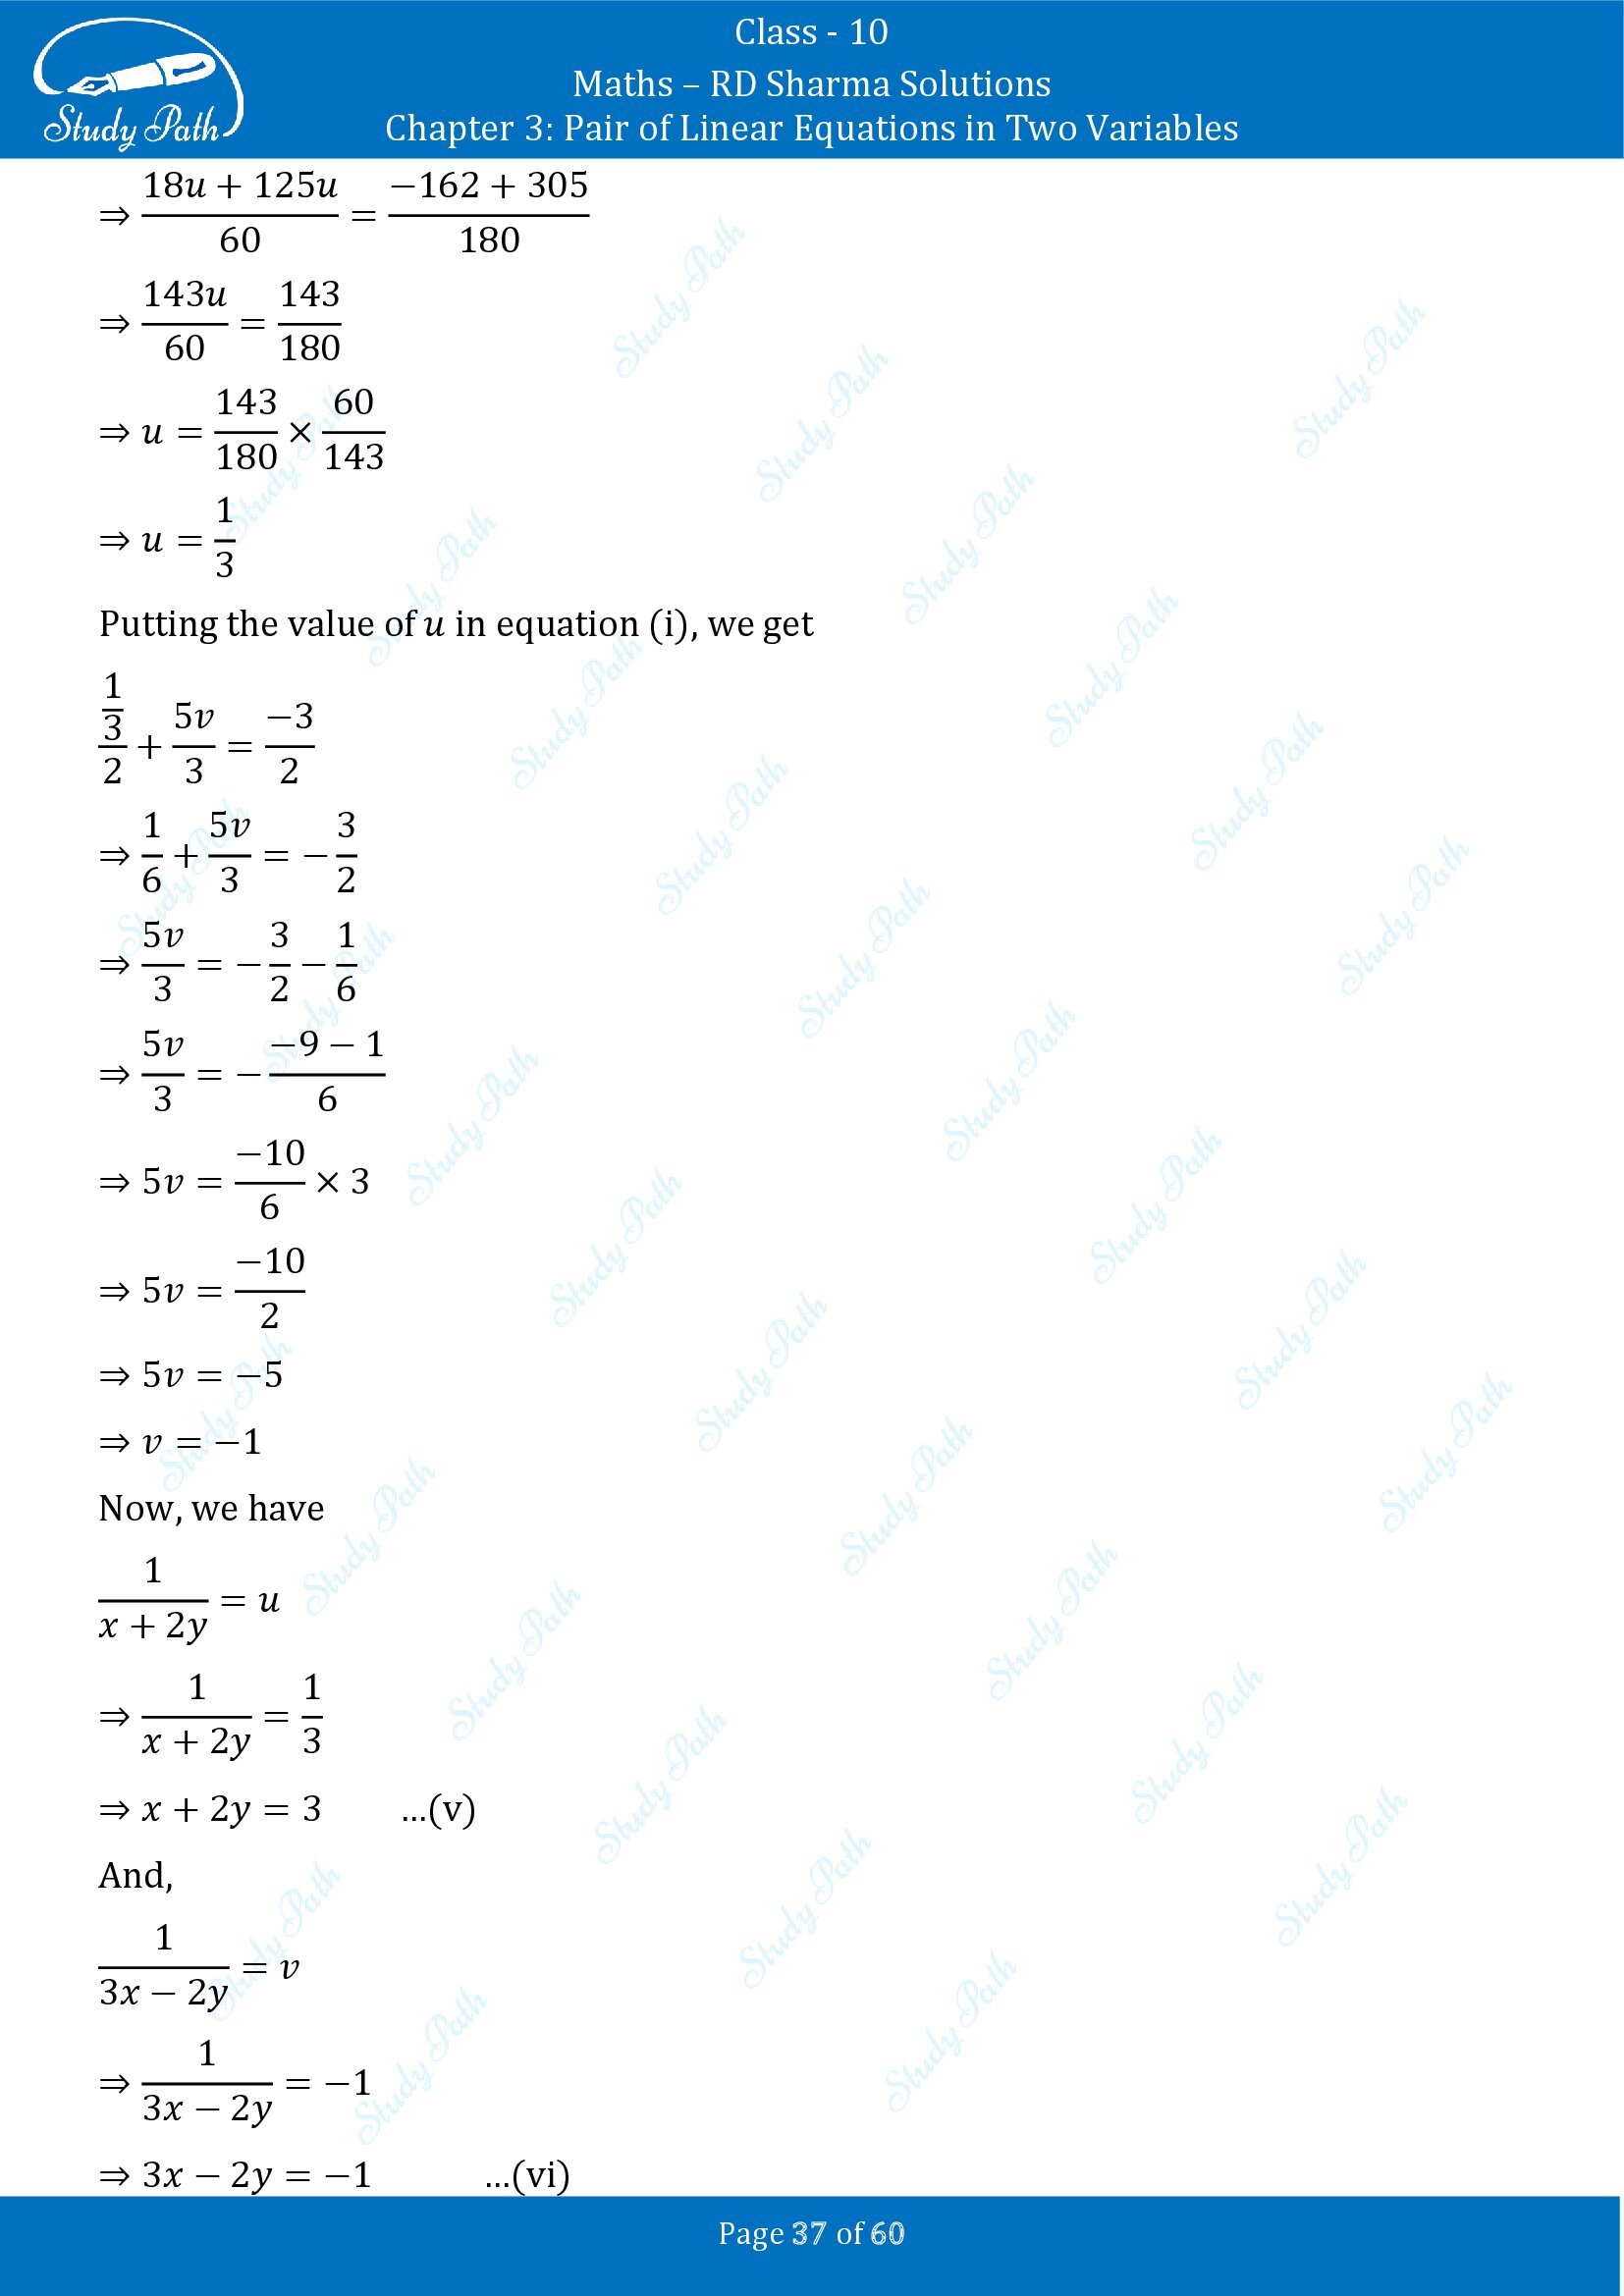 RD Sharma Solutions Class 10 Chapter 3 Pair of Linear Equations in Two Variables Exercise 3.3 00037